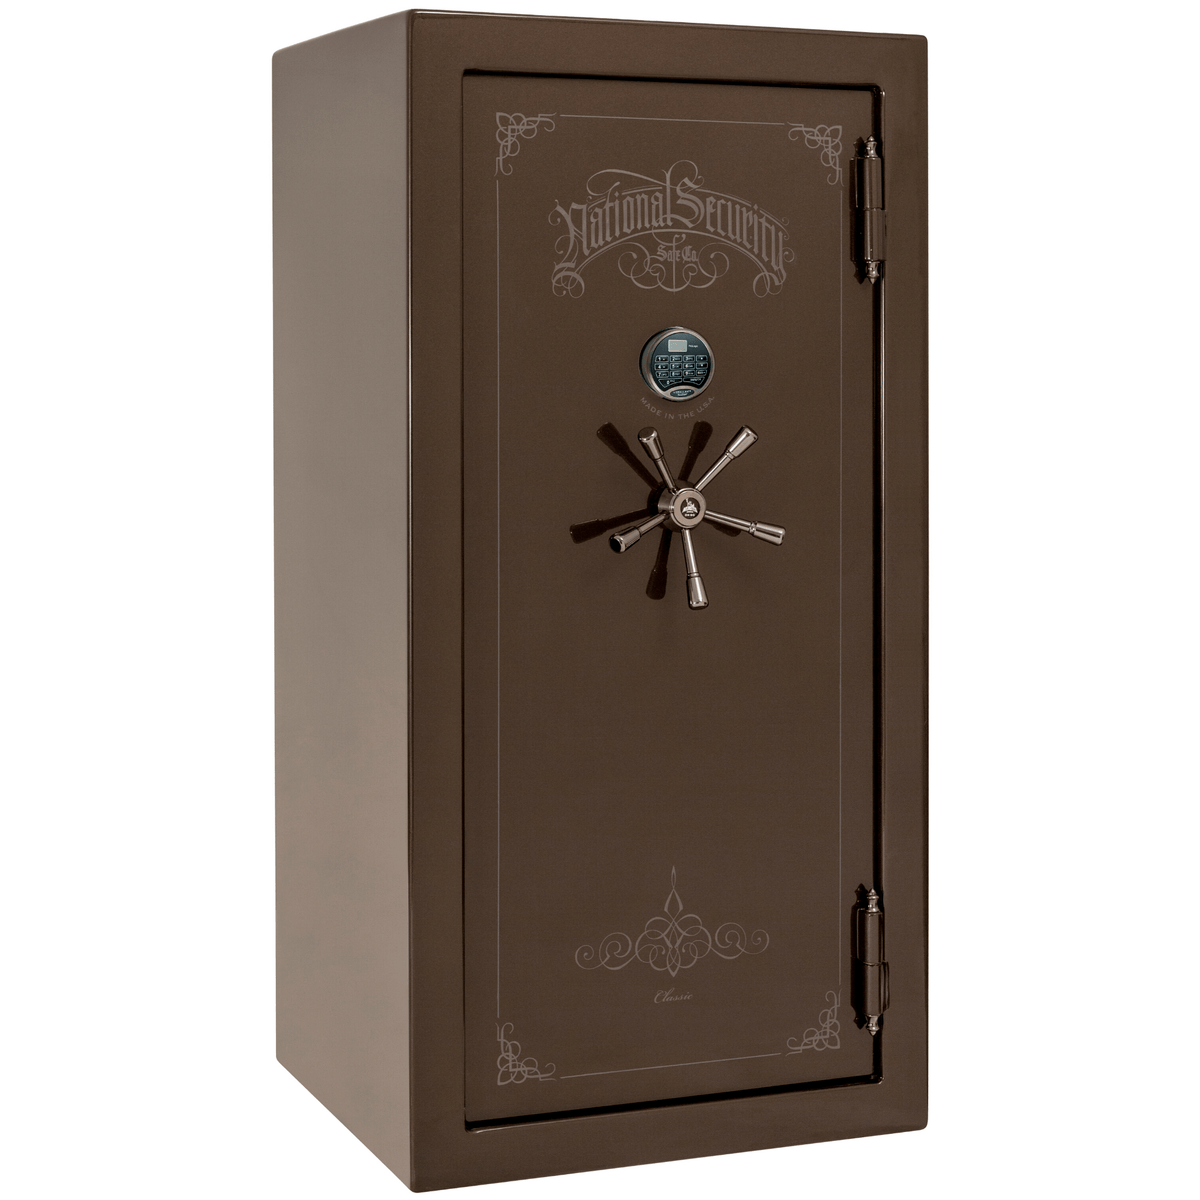 Liberty Safe Classic Plus 25 in Bronze Gloss with Black Chrome Electronic Lock, closed door.